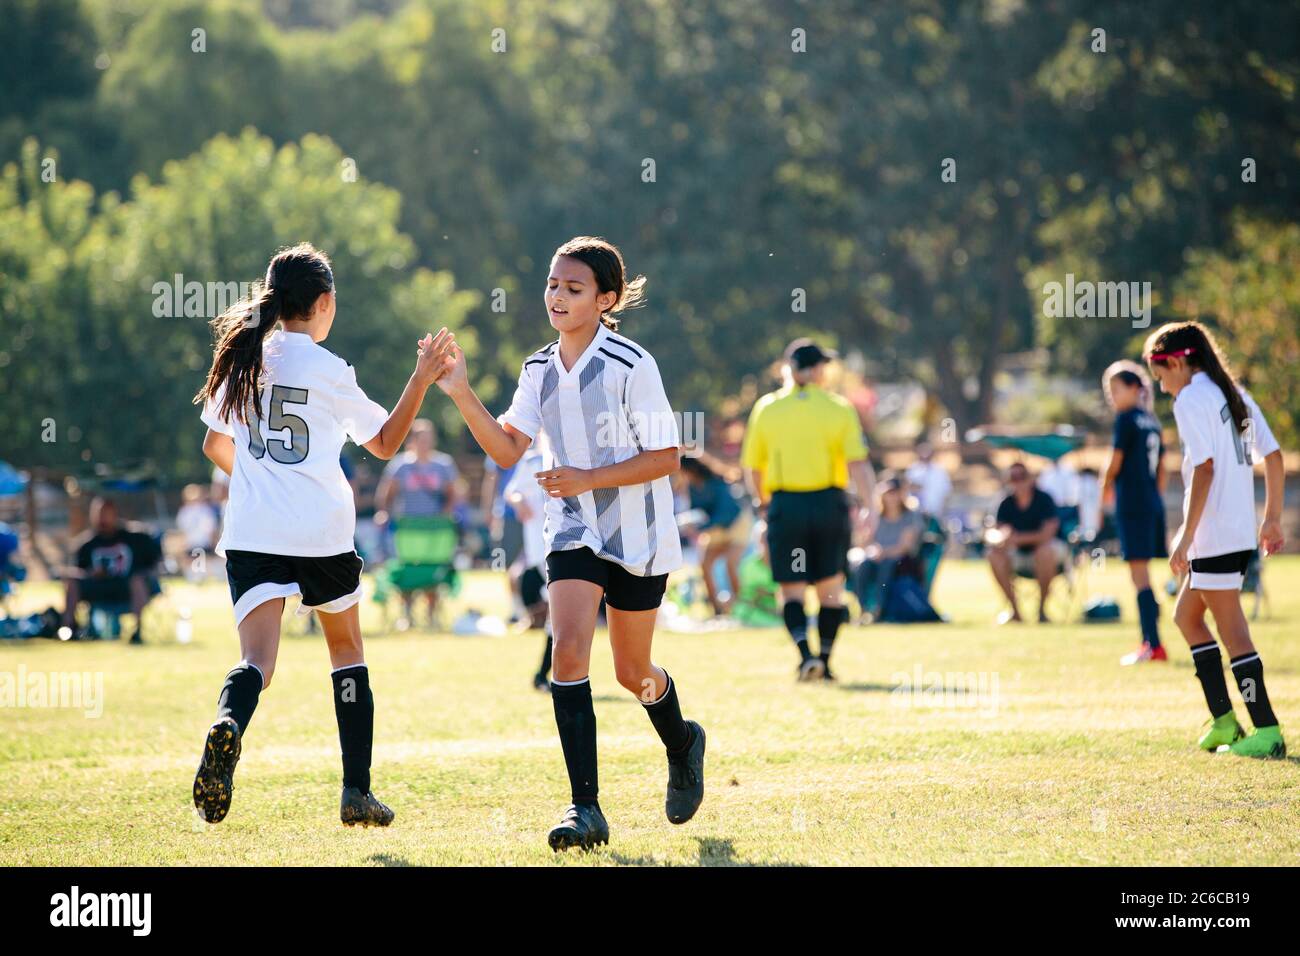 Soccer player girl gives her teammate a high five Stock Photo